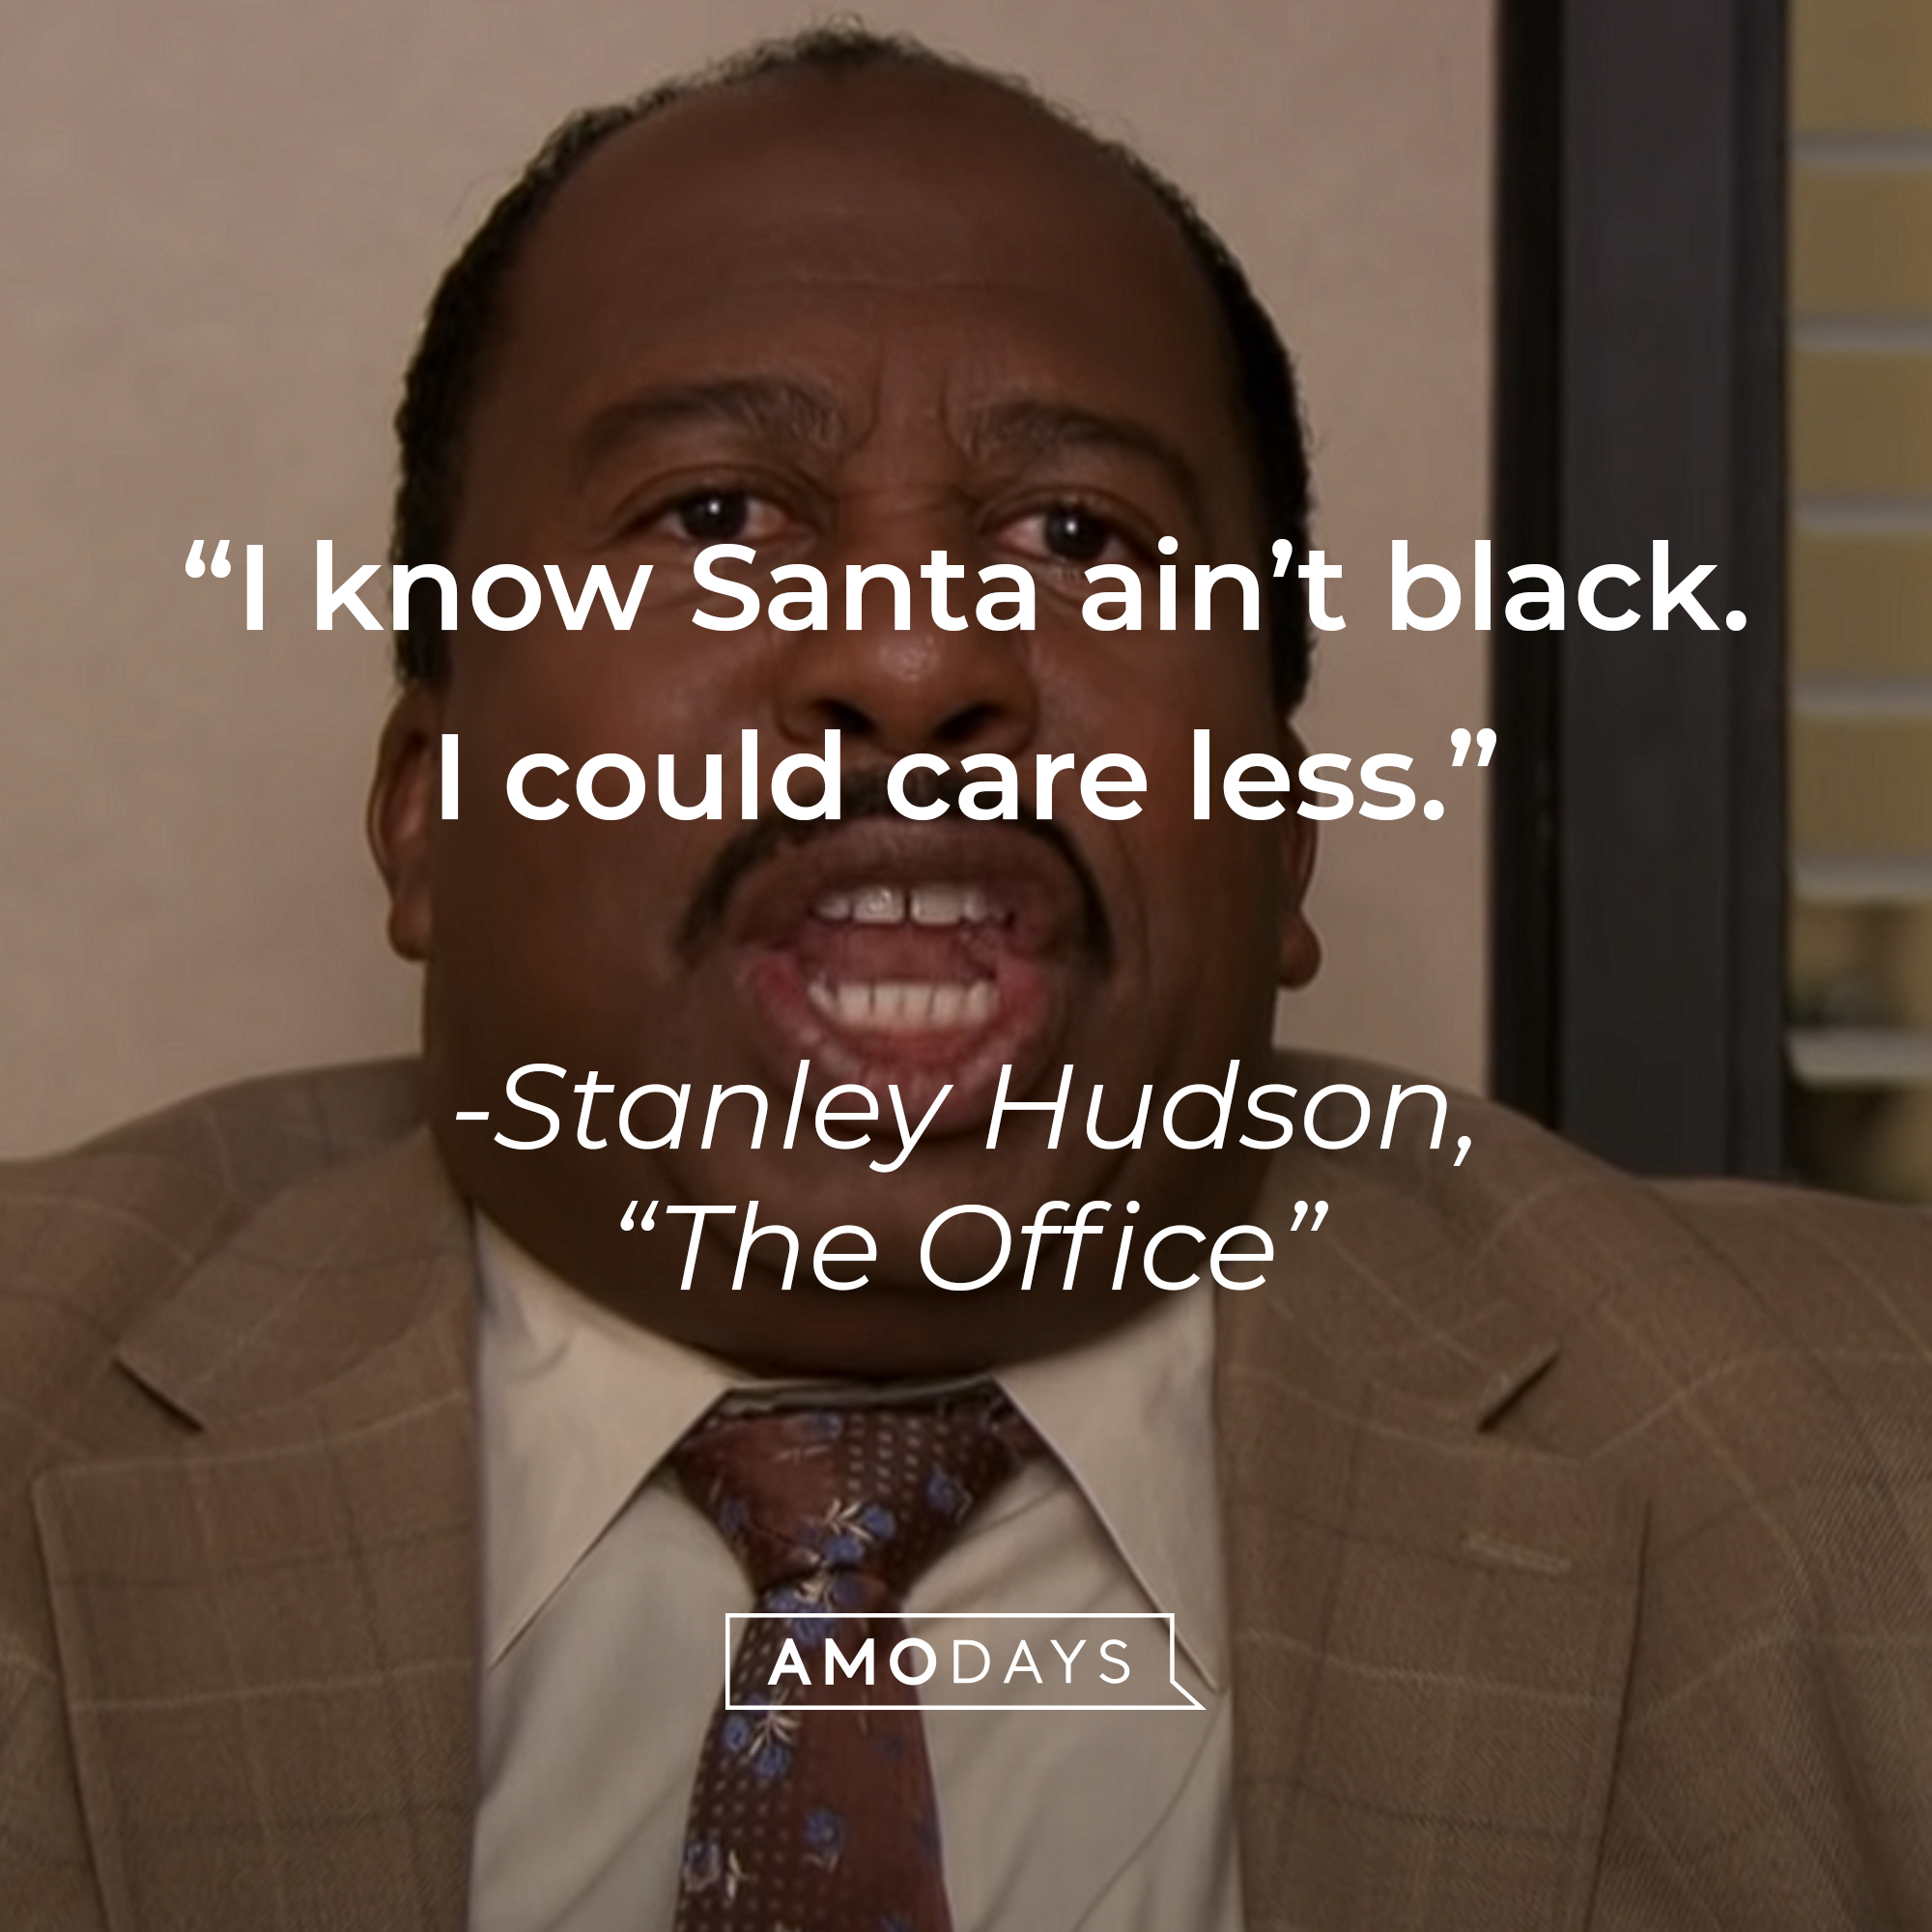 An image of Leslie David Baker as Stanley Hudson in "The Office" with the quote: “I know Santa ain’t black. I could care less.” | Source: youtube.com/The Office